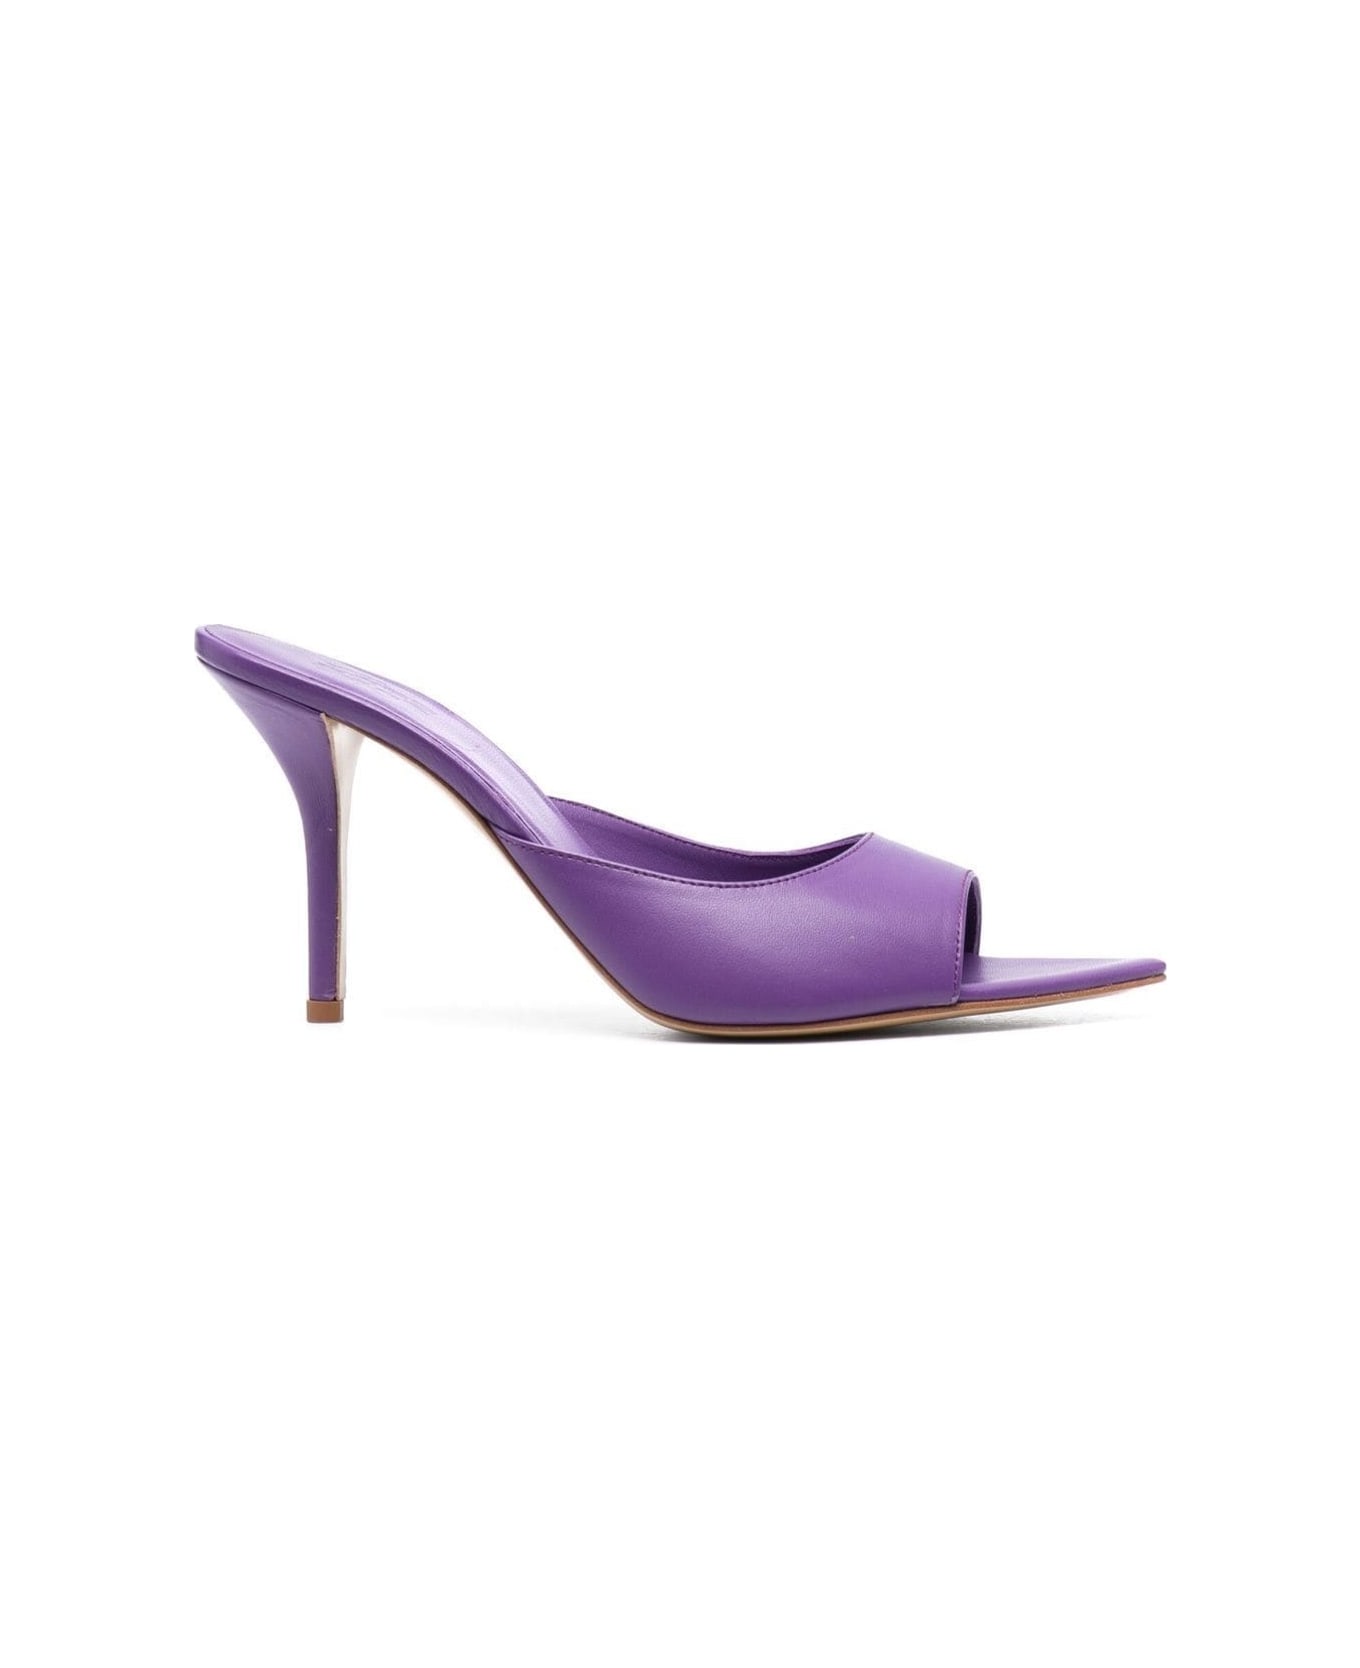 GIA BORGHINI Violet Perni Pointed Toe Pumps In Leather Woman - Violet